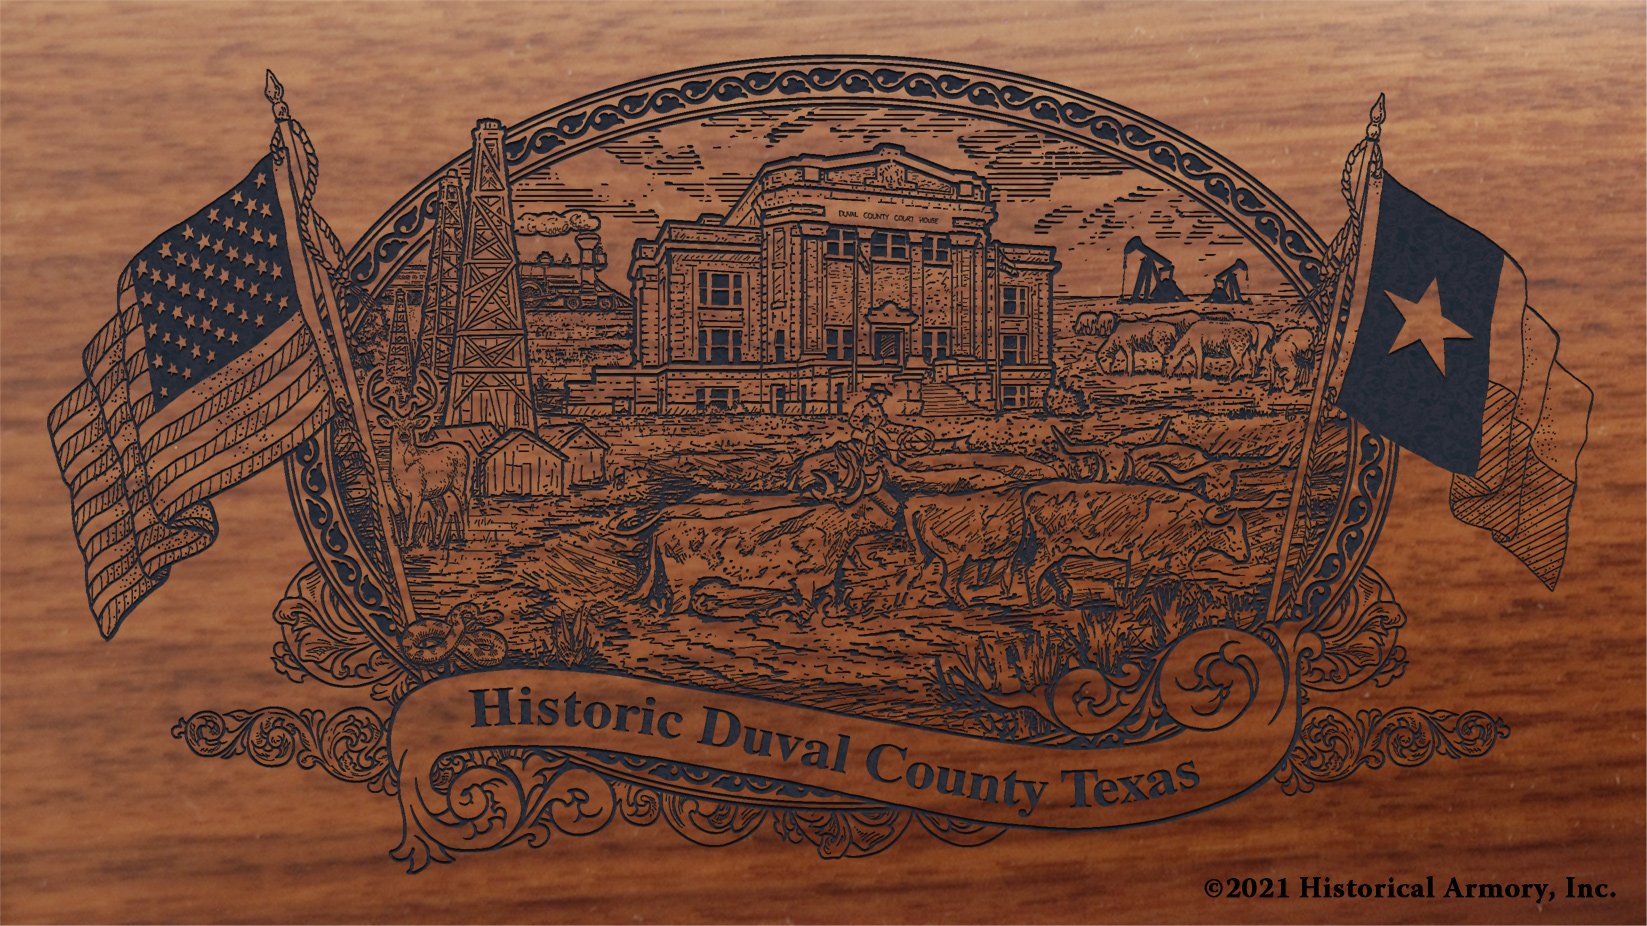 Engraved artwork | History of Duval County Texas | Historical Armory